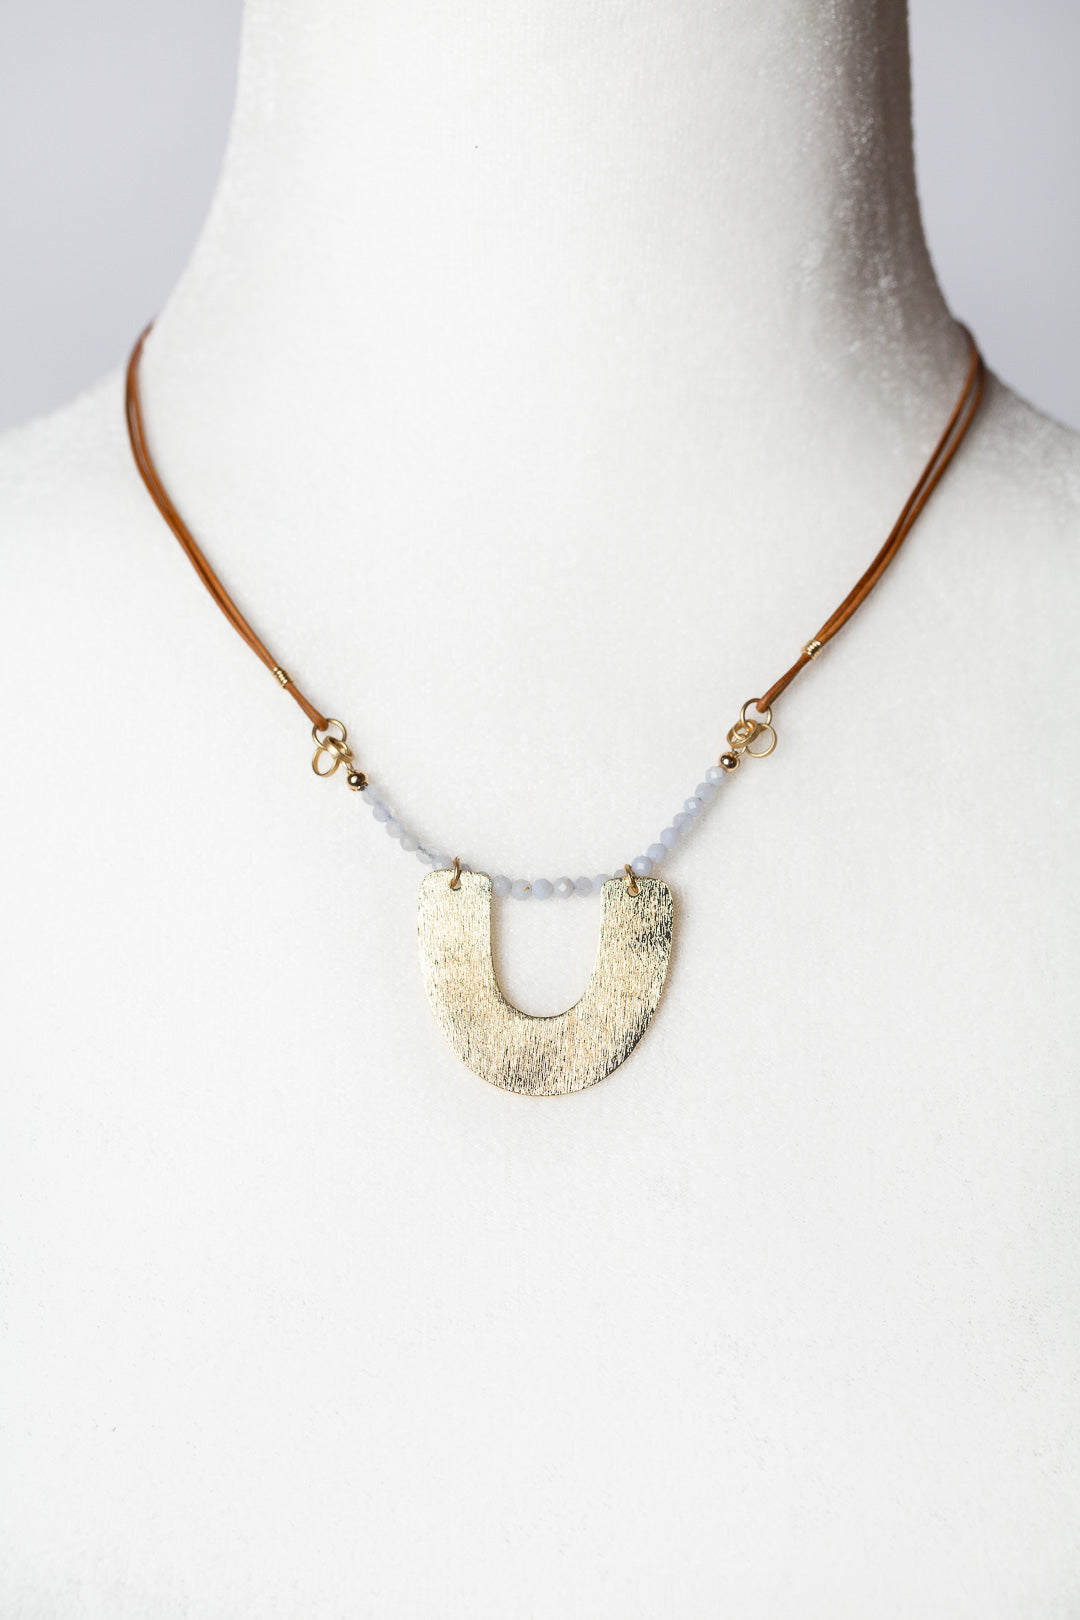 Blue Lace 16.5-18.5" Blue Lace Agate With Brushed Gold Statement Necklace